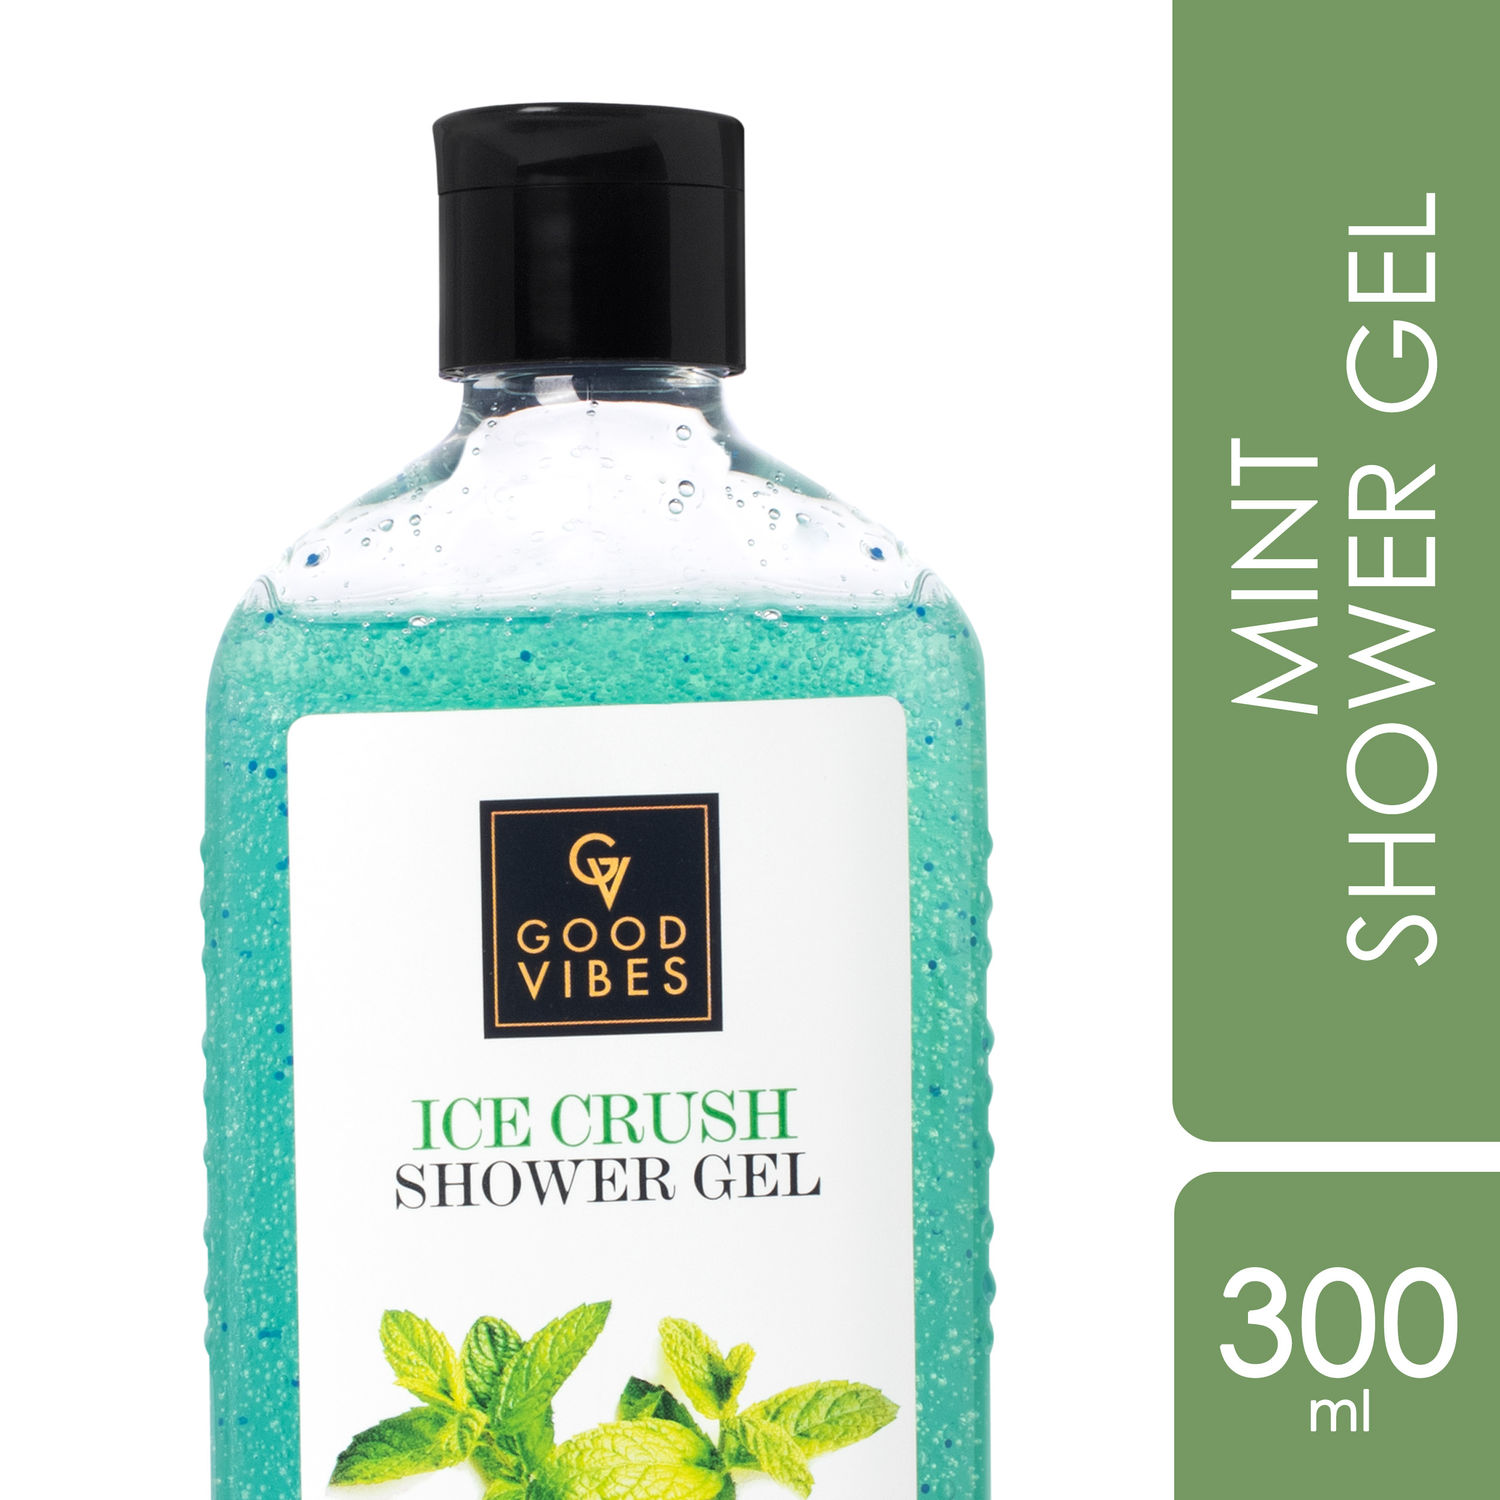 Good Vibes Mint Ice Crush Shower Gel | Vegan, No Parabens, No Mineral Oil, Certified Fragrance, No Animal Testing (300 ml)